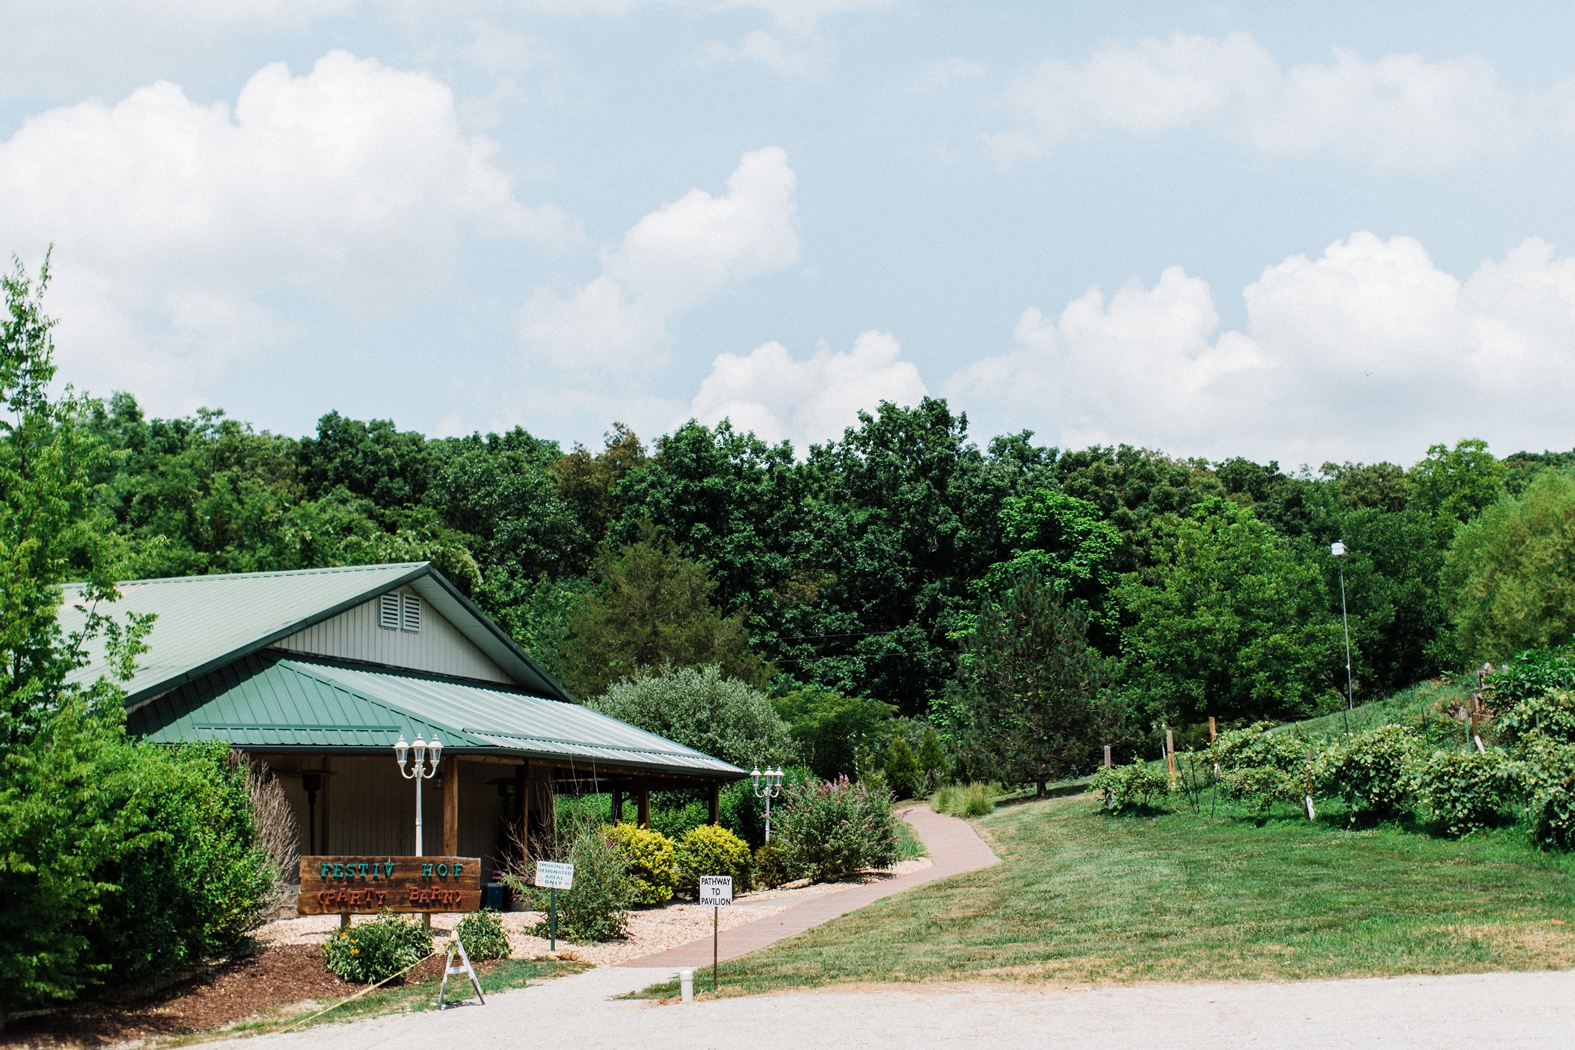 Wedding at the barn at Little Piney Lodge in Hermann, Missouri (MO)